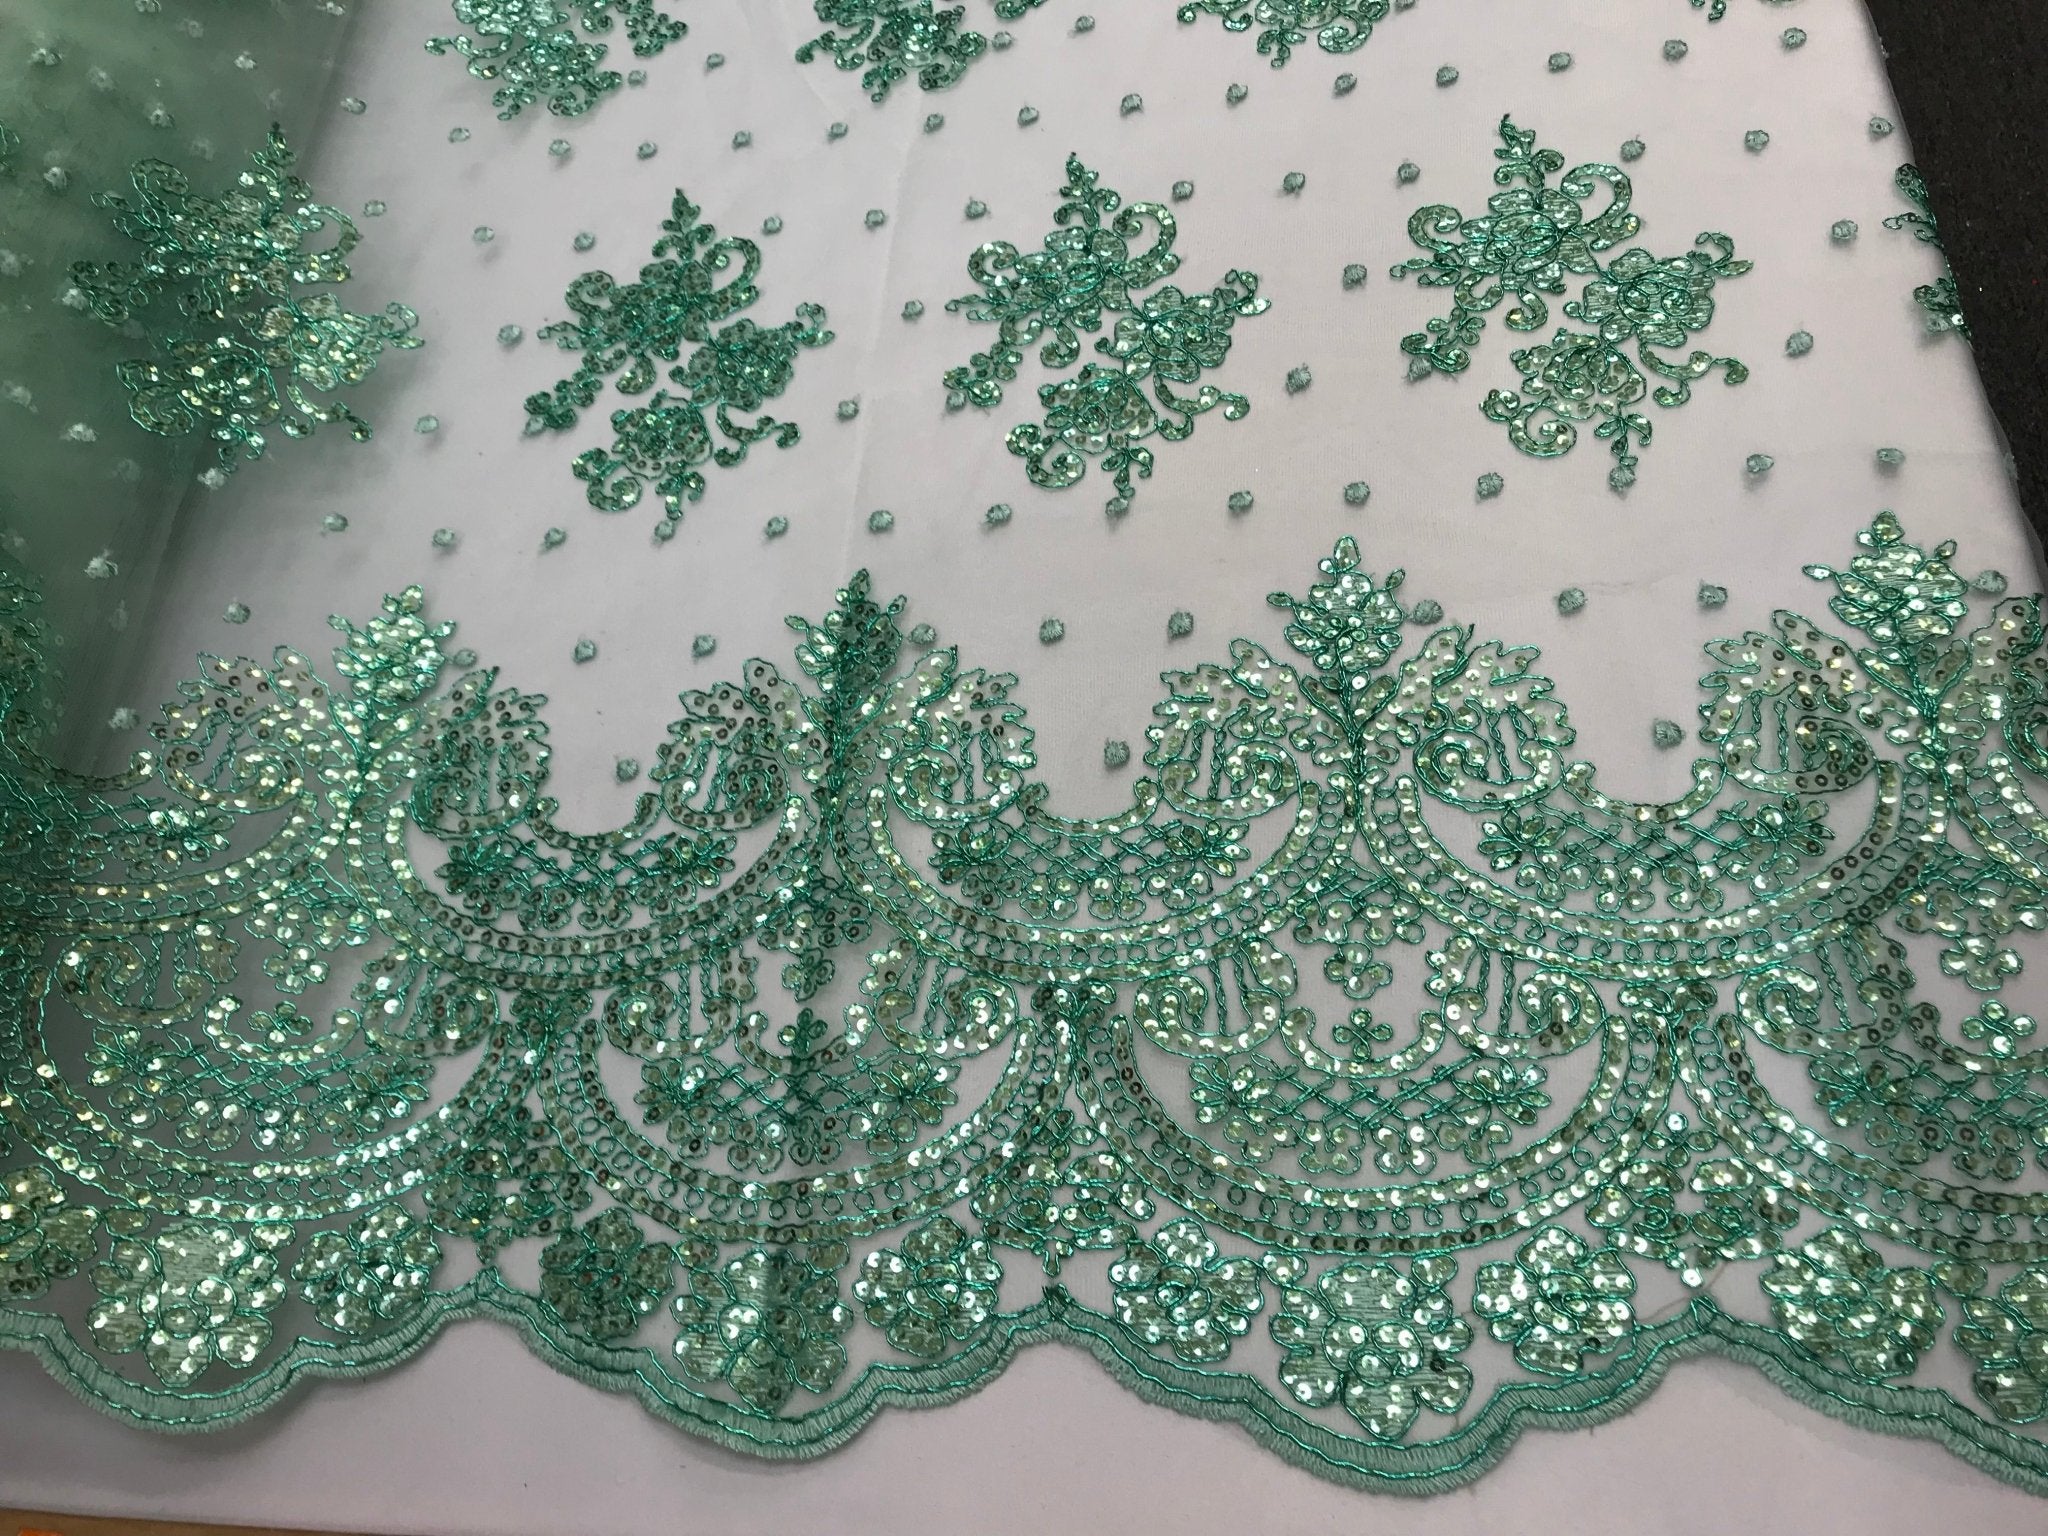 Mint Design shop prom Bridal Design transparent Fabric Mesh lace Embroidered wedding decoration night gowns tablecloths fashion dressesICE FABRICSICE FABRICSMint Design shop prom Bridal Design transparent Fabric Mesh lace Embroidered wedding decoration night gowns tablecloths fashion dresses ICE FABRICS